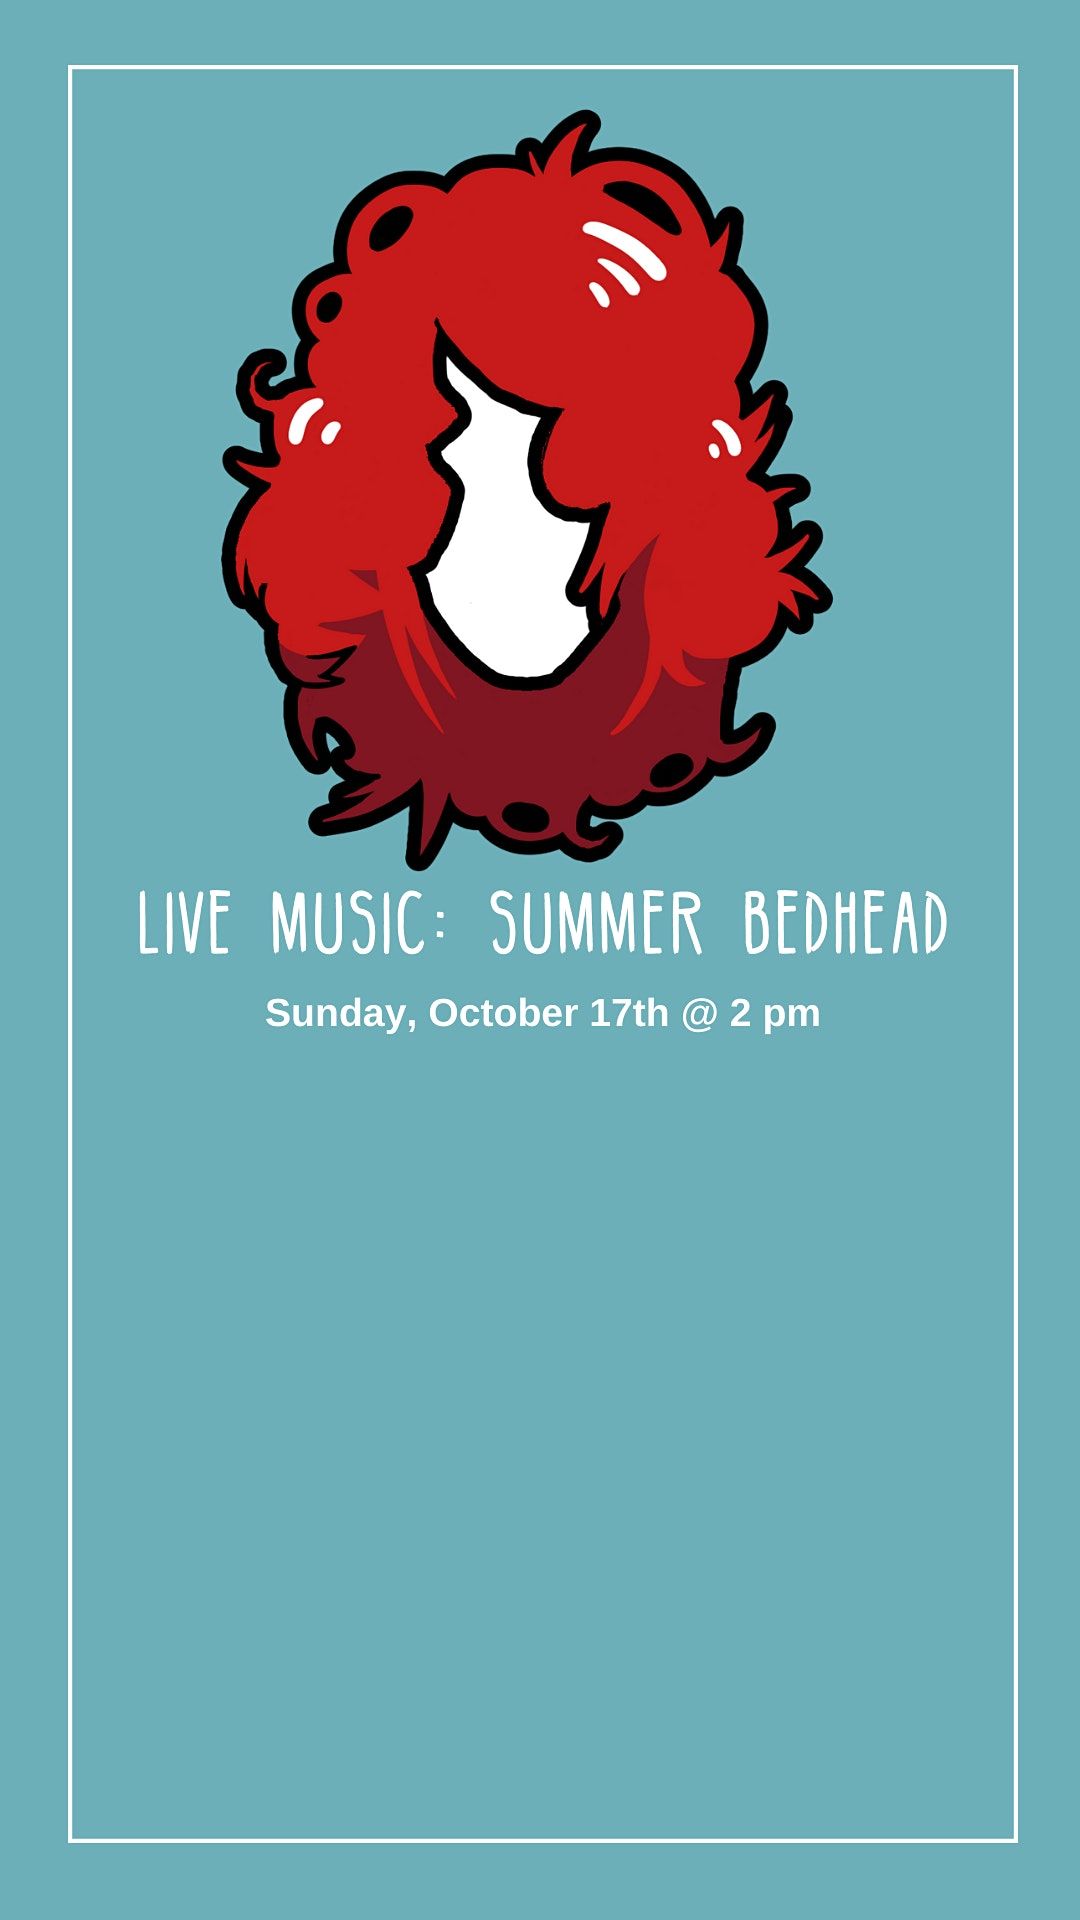 Live Music Event with Summer Bedhead